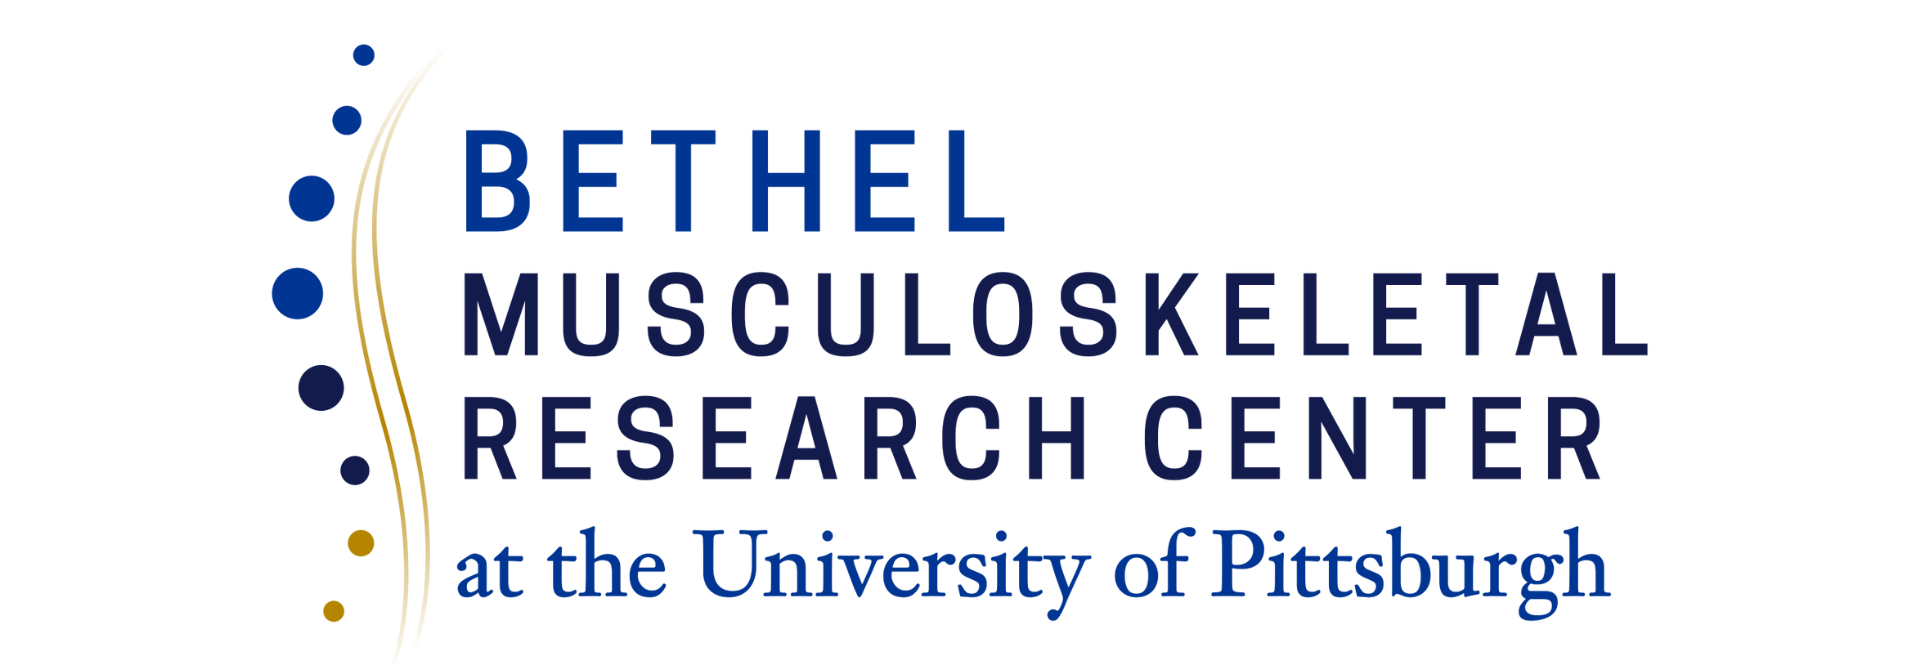 Bethel Musculoskeletal Research Center logo in blue and gold design